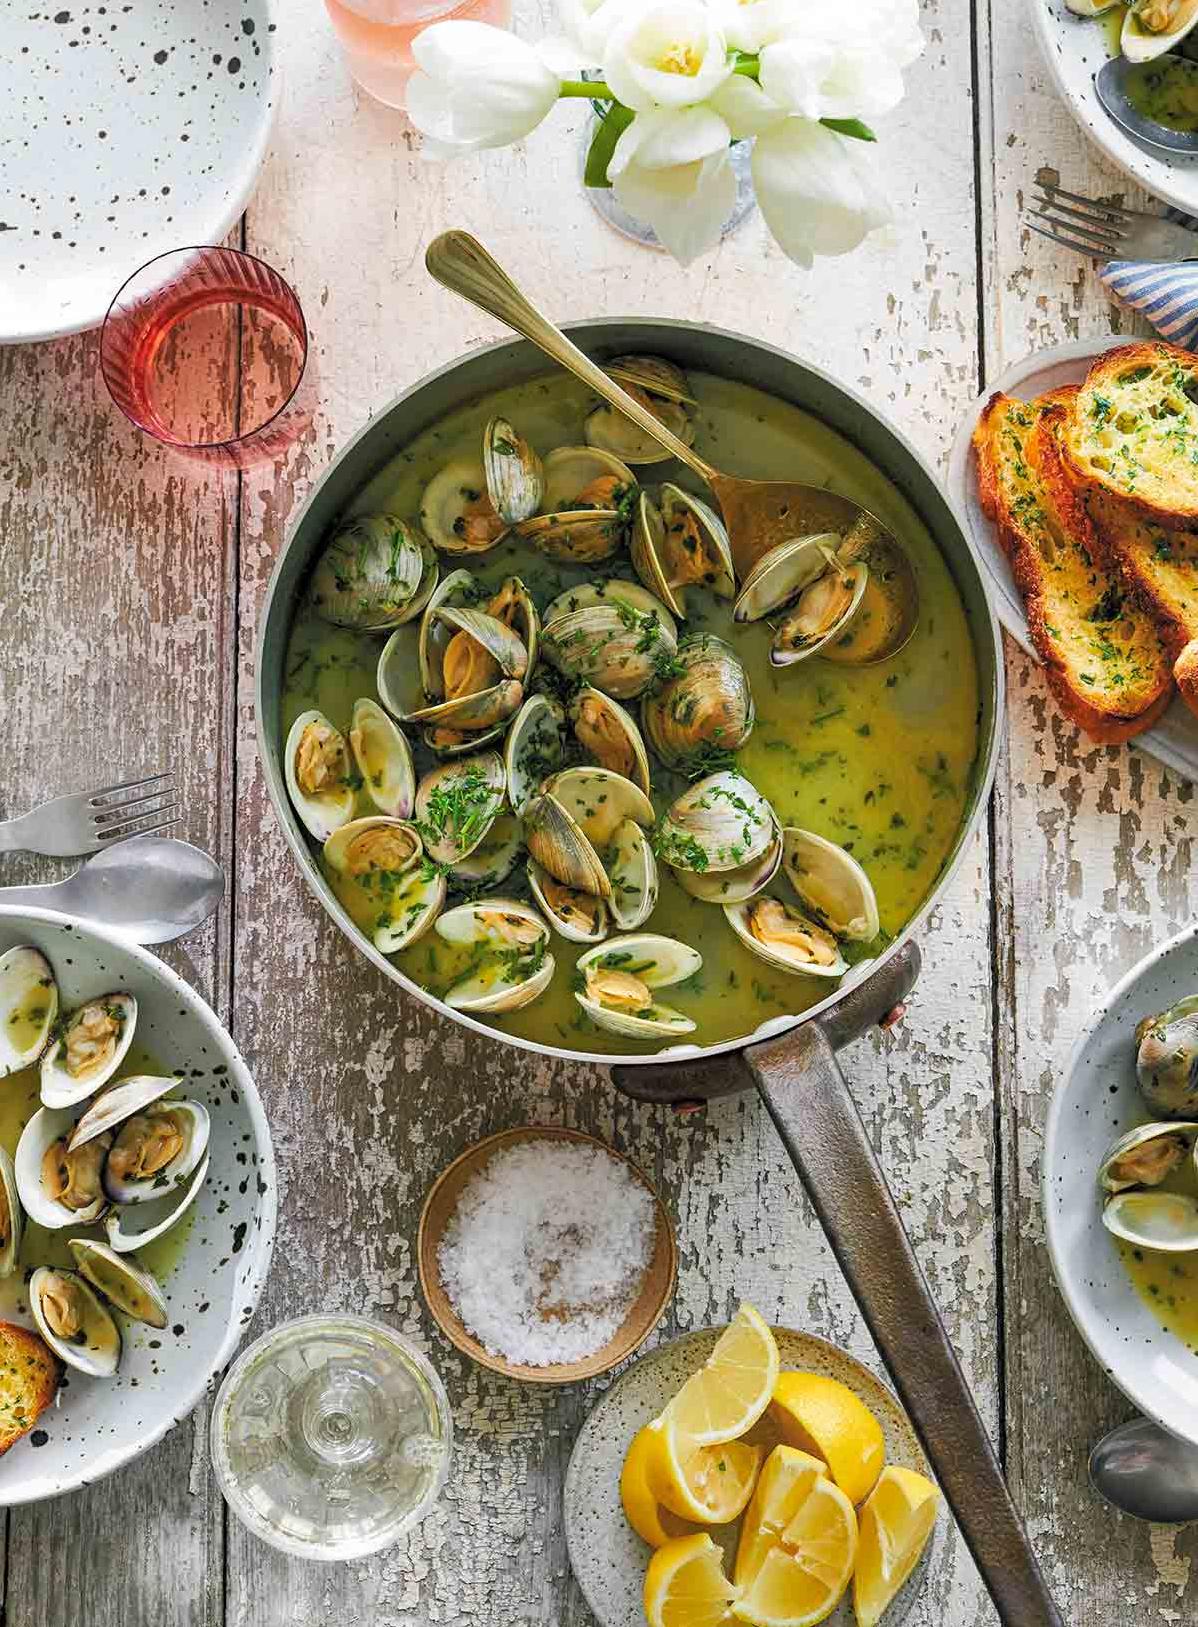  A sophisticated twist on the classic clam dish.